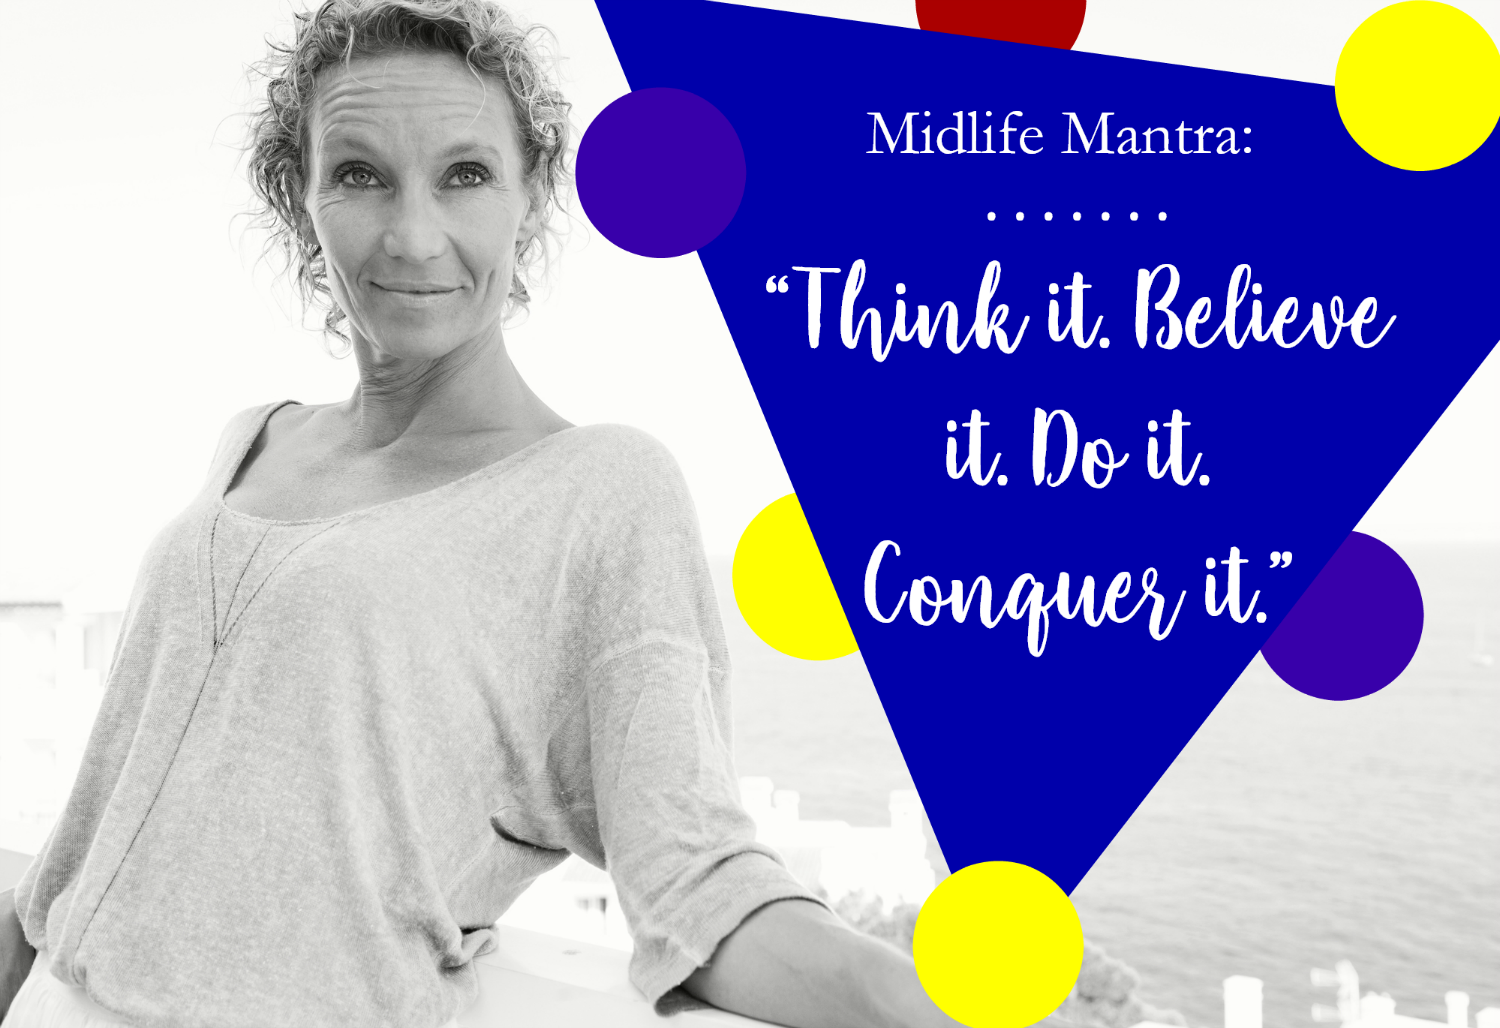 MIDLIFE MANTRA: Think It. Believe It. Do It. Conquer It.